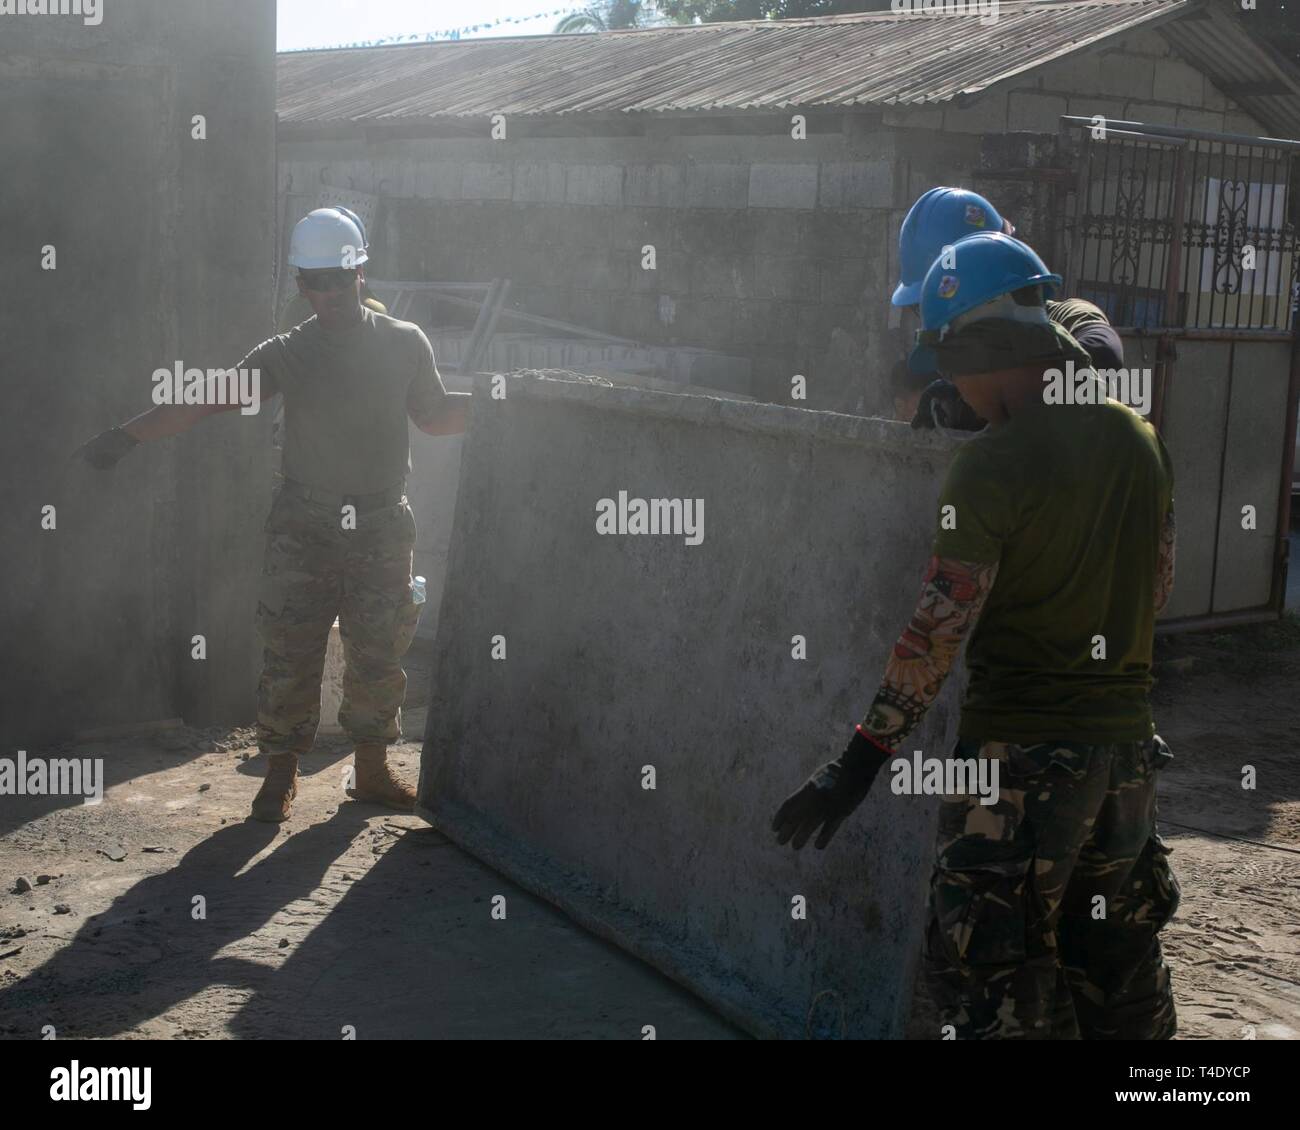 U.S. Army Spc. Sakrin Dahao, left, and Philippine Air Force Airman 2nd Class Ronel Vistal, right, move a cement tray in Pagasa, Bataan, Philippines, March 25, 2019. Two new classrooms are being constructed with the combined efforts of the U.S. Army and the Philippine Air Force as part of Exercise Balikatan 2019. Balikatan is a military training exercise hosted by the Philippines between the AFP and U.S. military, along with participants from the Australian Defence Force. Lewis, a Lafayette, La. native, is a combat engineer with 561st Engineering Support Company, 84th Engineering Battalion from Stock Photo